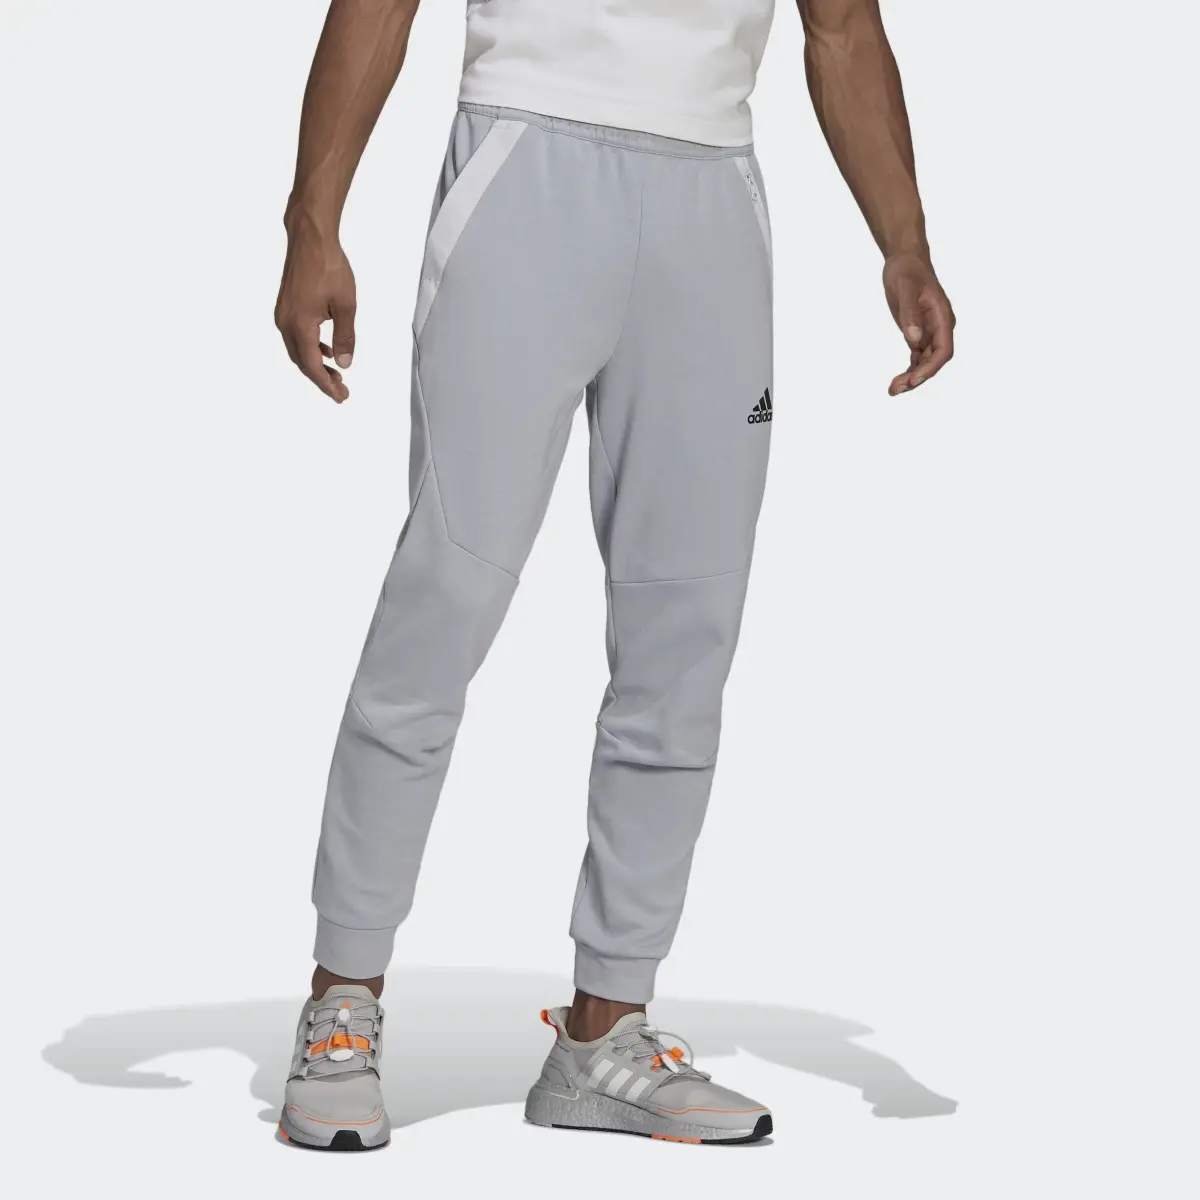 Adidas Designed for Gameday Pants. 3